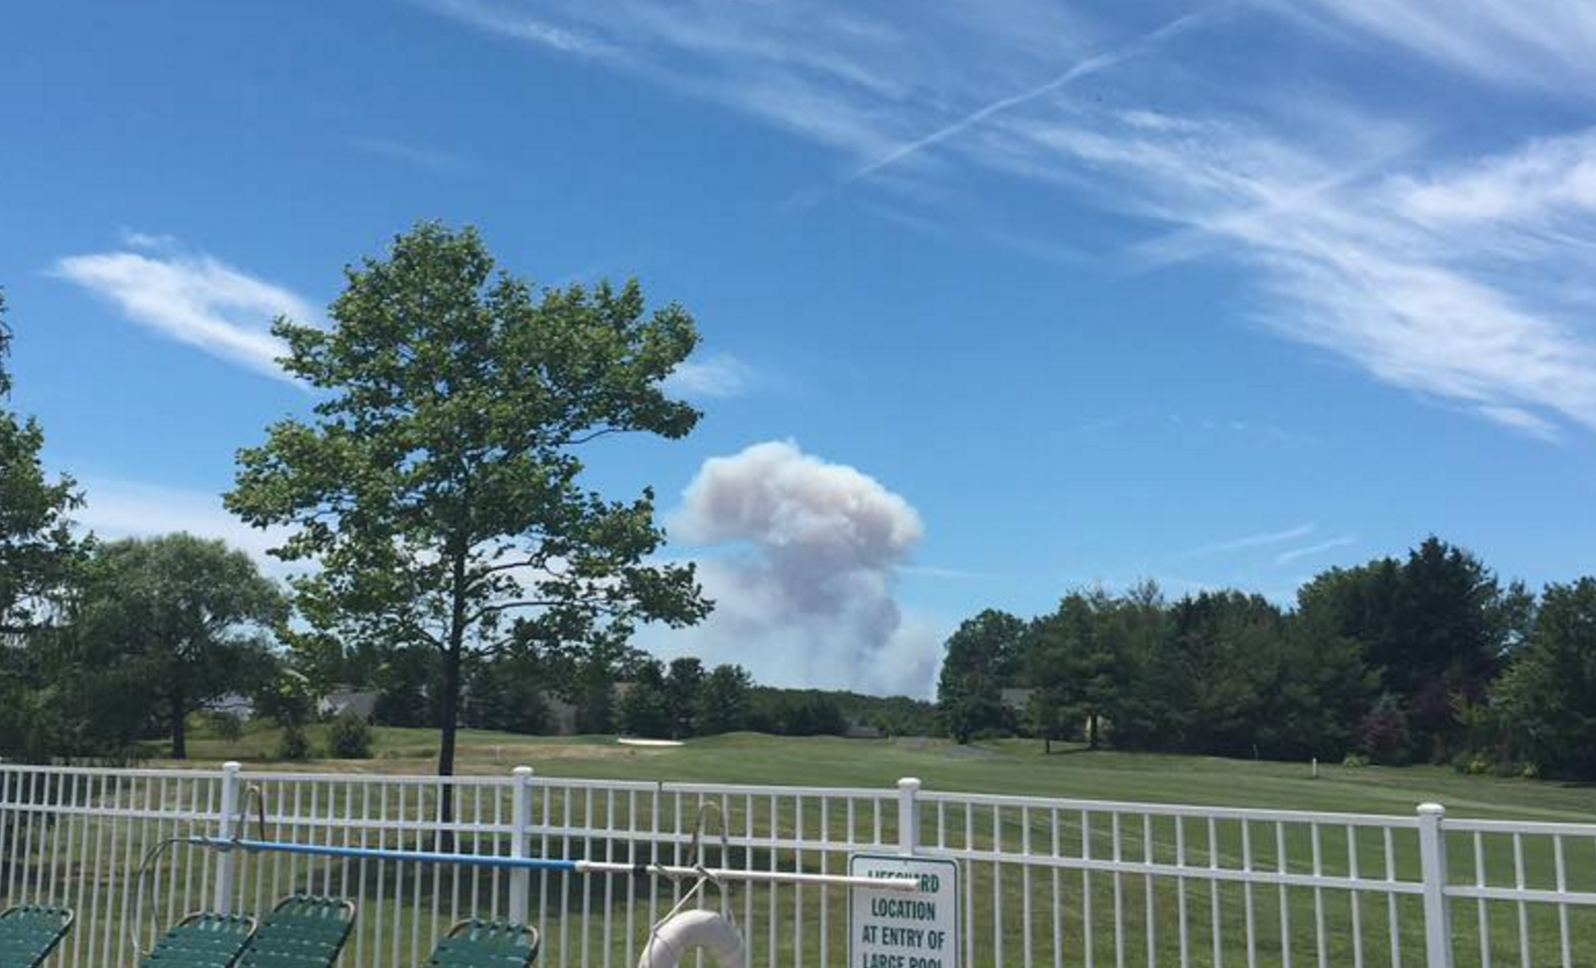 The wildfire's smoke plume as seen from Manchester. (Photo: JSHN contributor Michele Gold-Heimbuch)